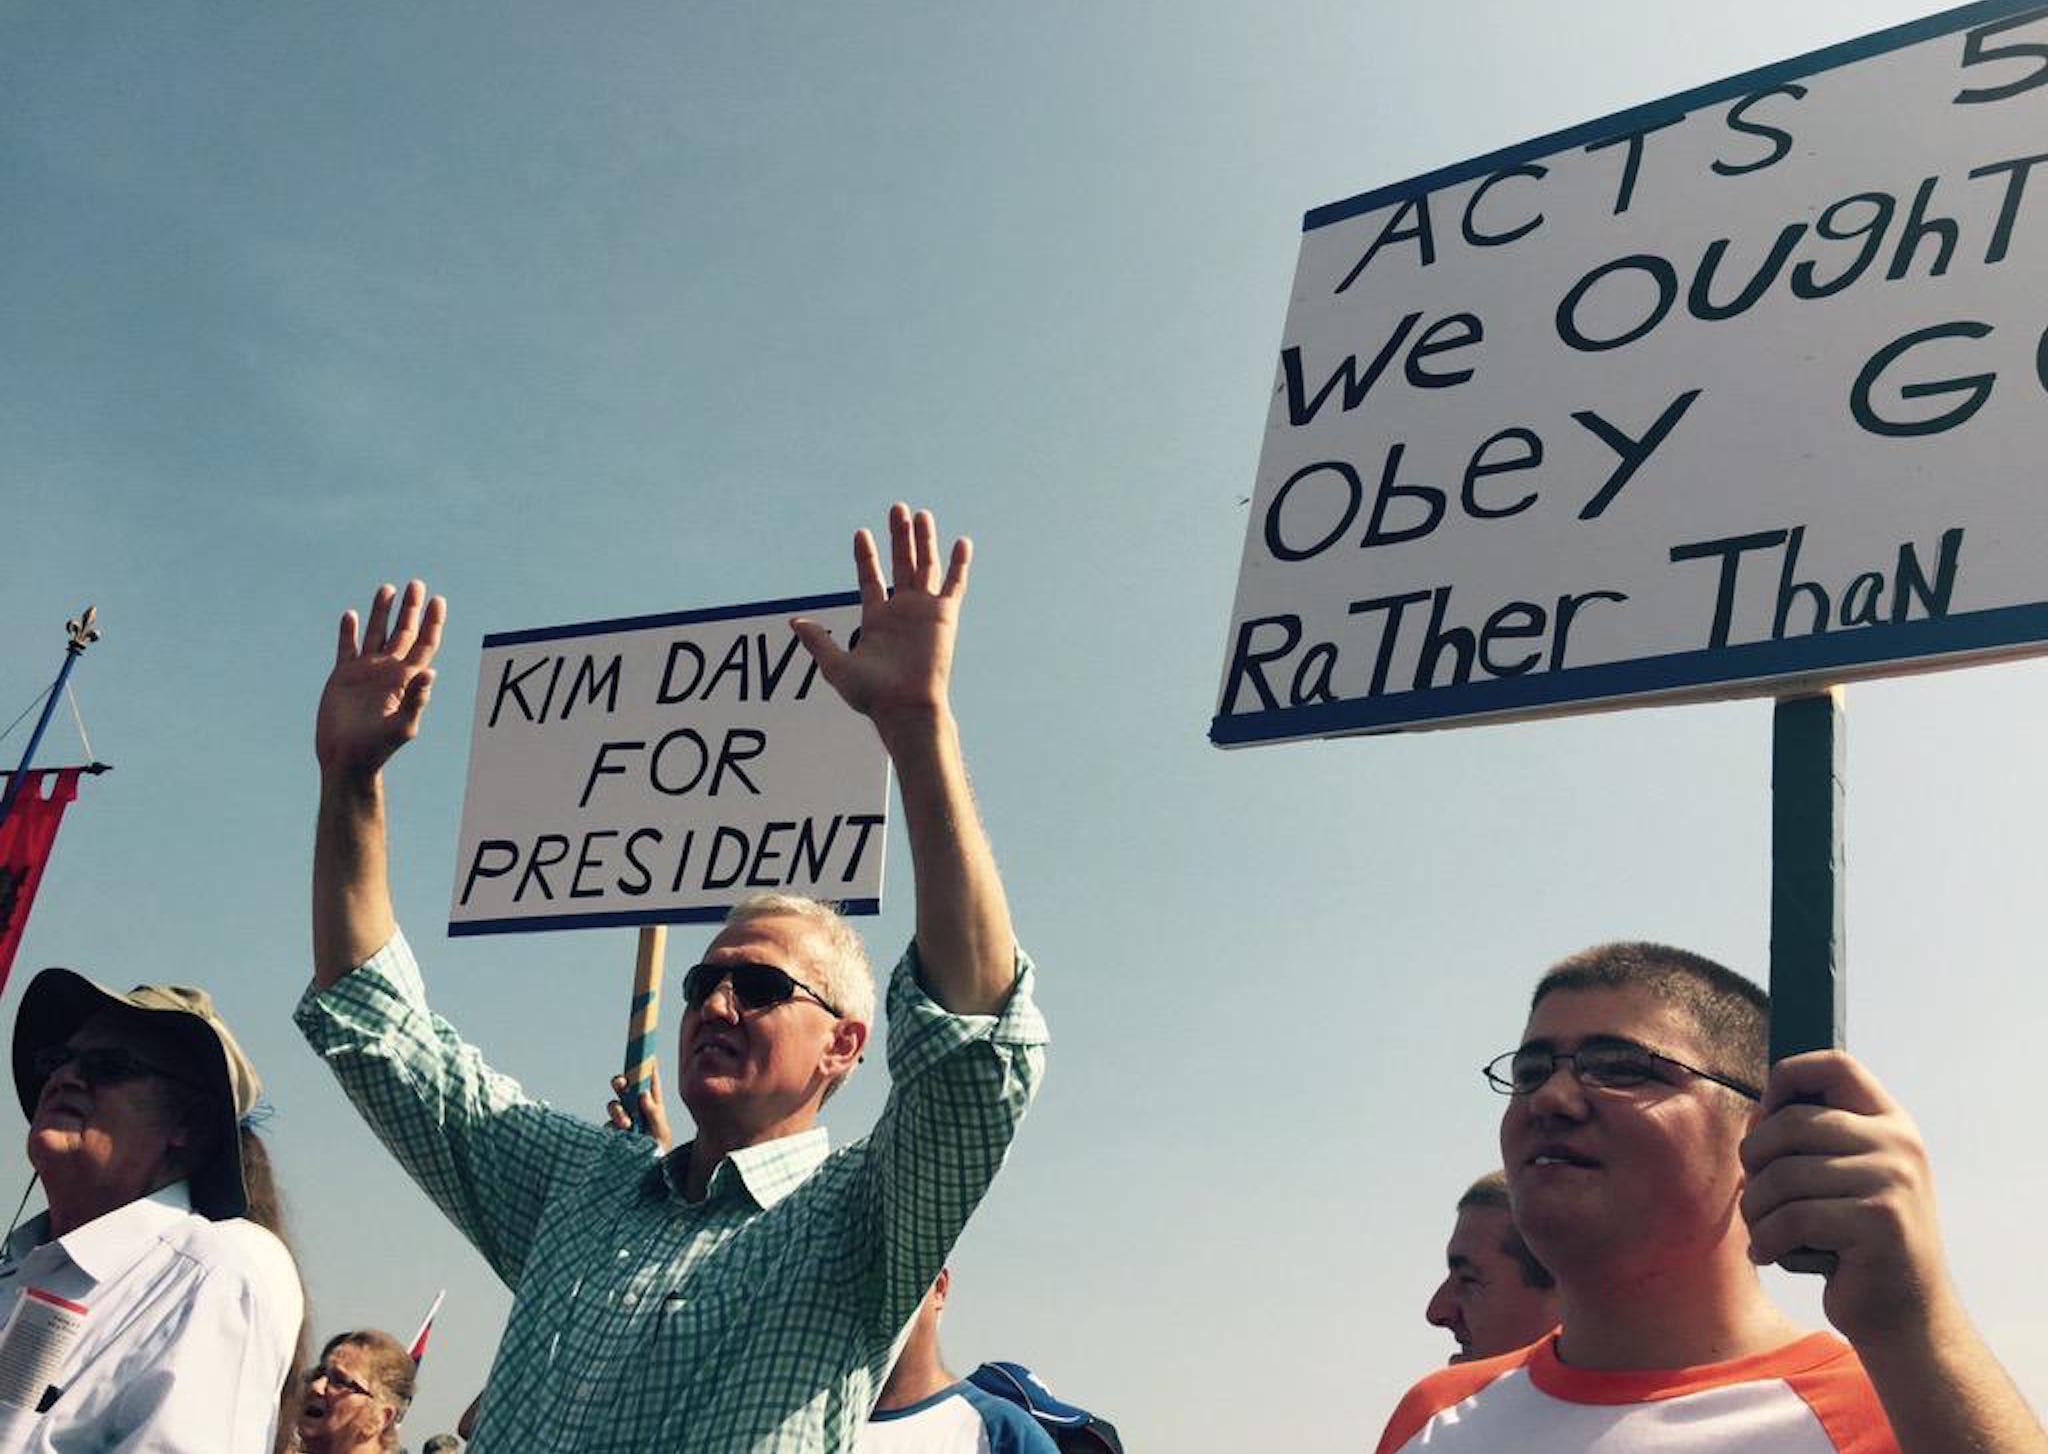 Supporters of Kim Davis hold up signs outside the Carter County Detention Center.